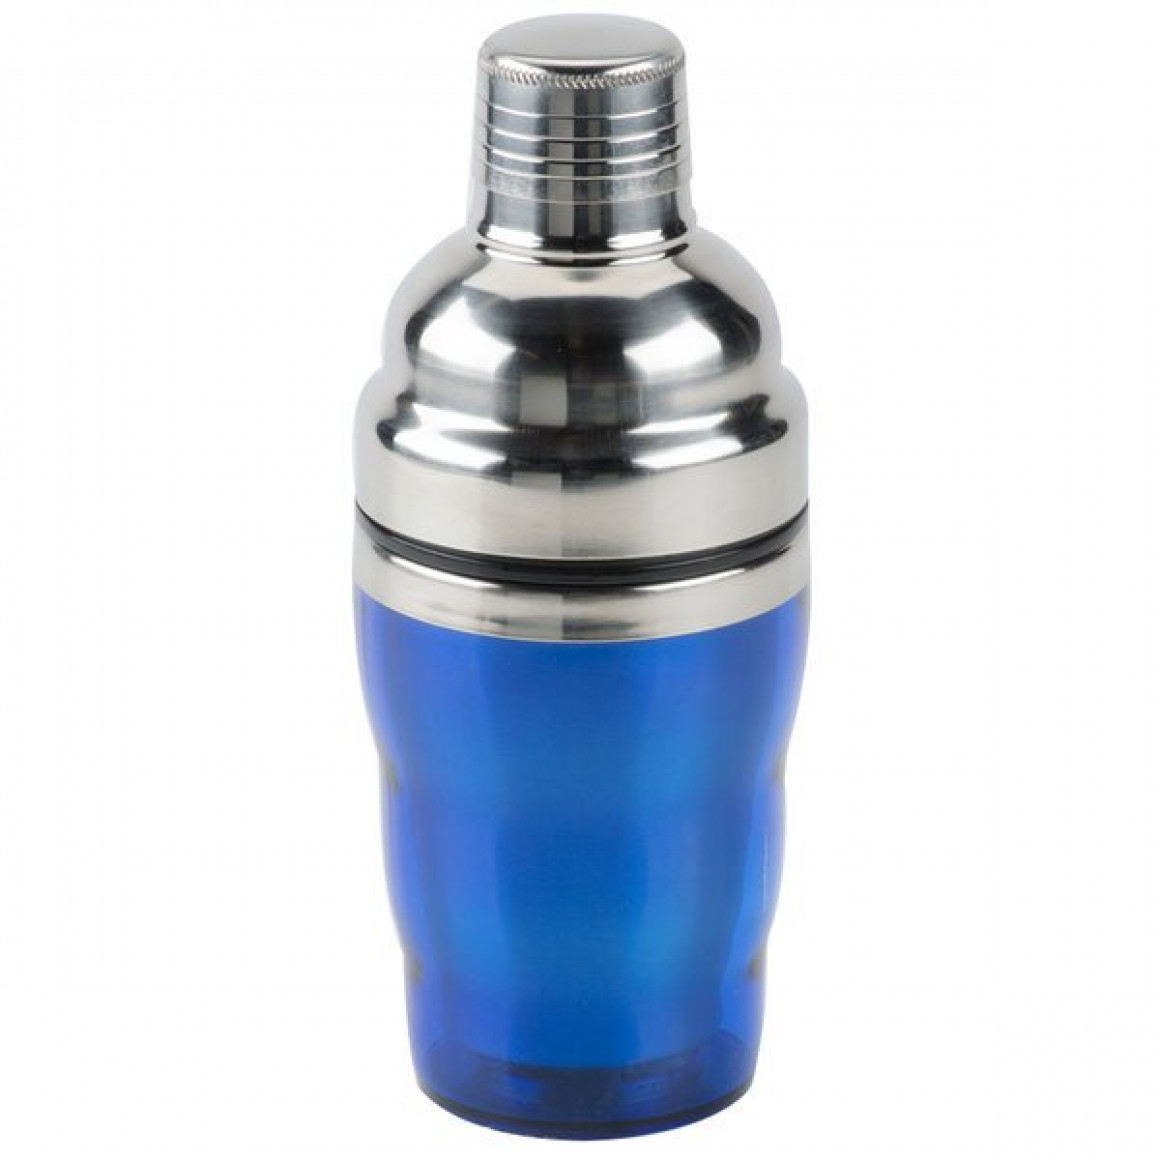 COCKTAIL SHAKER, STAINLESS STEEL, ACRYLIC, BLUE, 10 OZ.